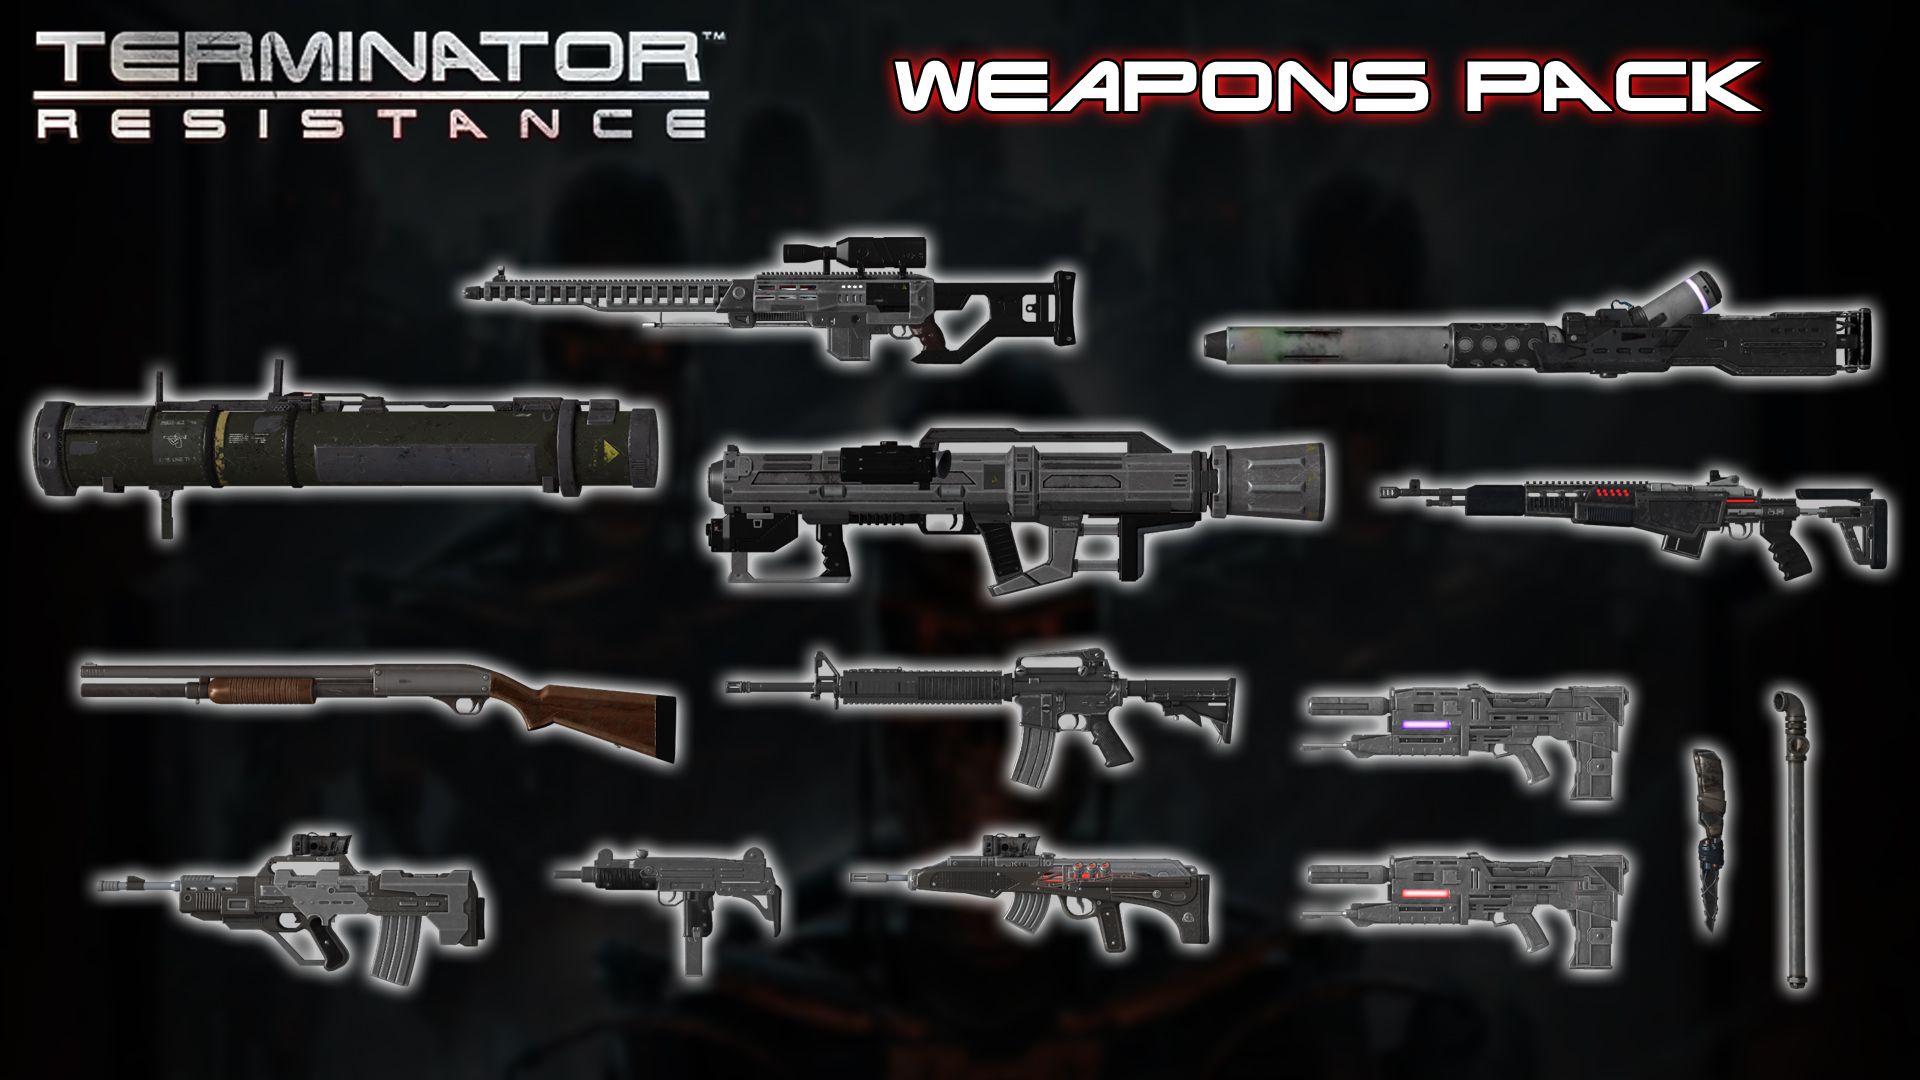 Terminator Resistance - Weapons Pack [XPS] by 972oTeV on DeviantArt